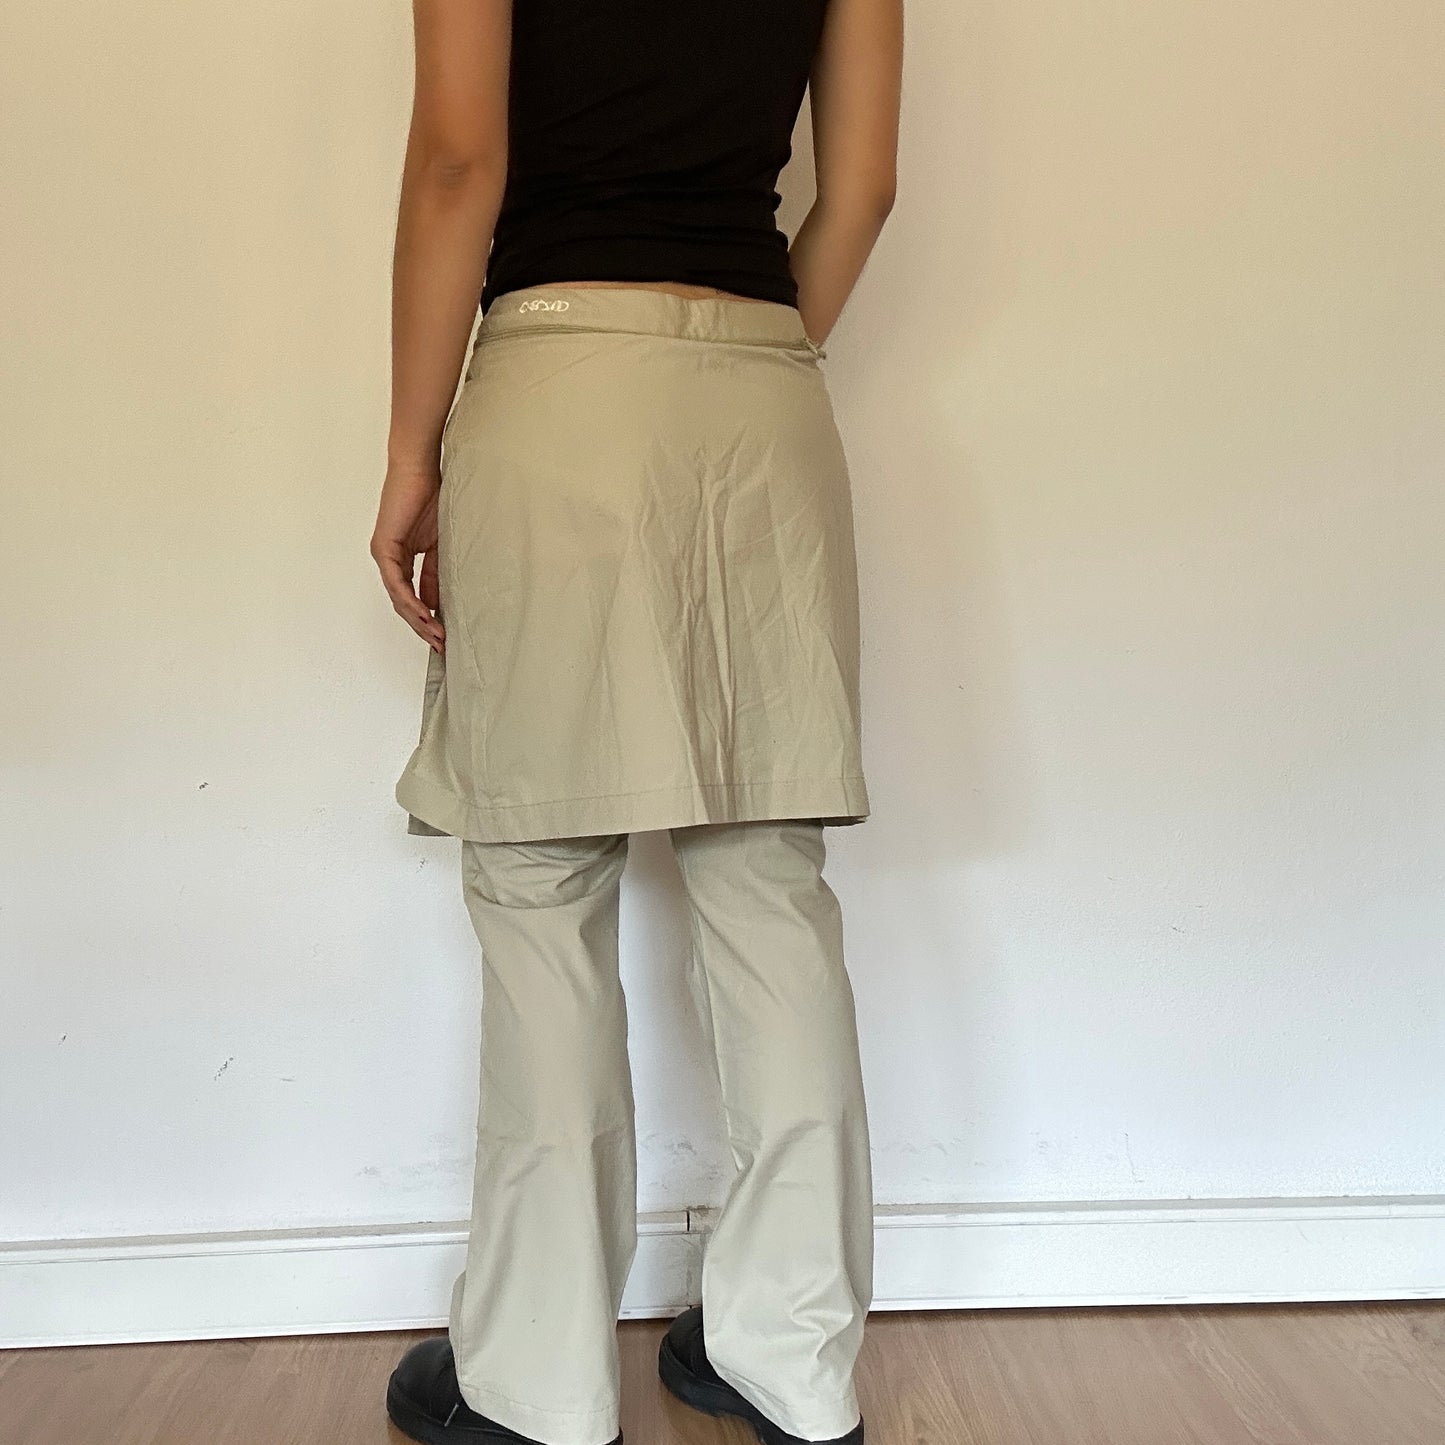 Vintage Deadstock Pants With Skirt